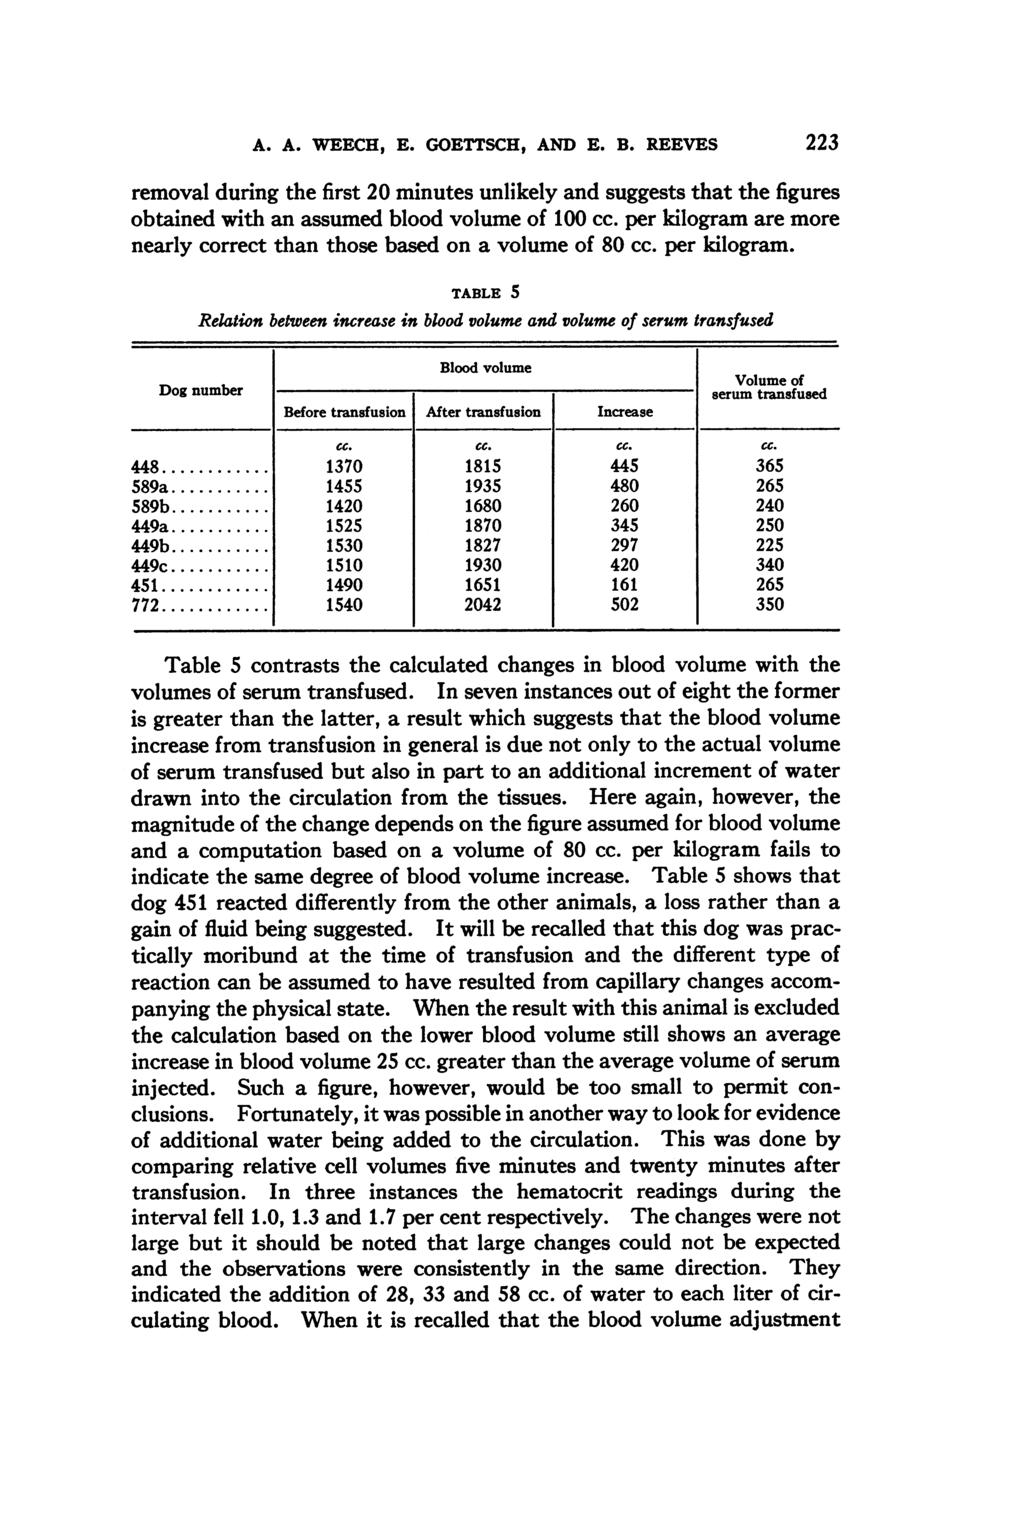 A. A. WEECH, E. GOETTSCH, AND E. B. REEVES removal during the first 20 minutes unlikely and suggests that the figures obtained with an assumed blood volume of 100 cc.